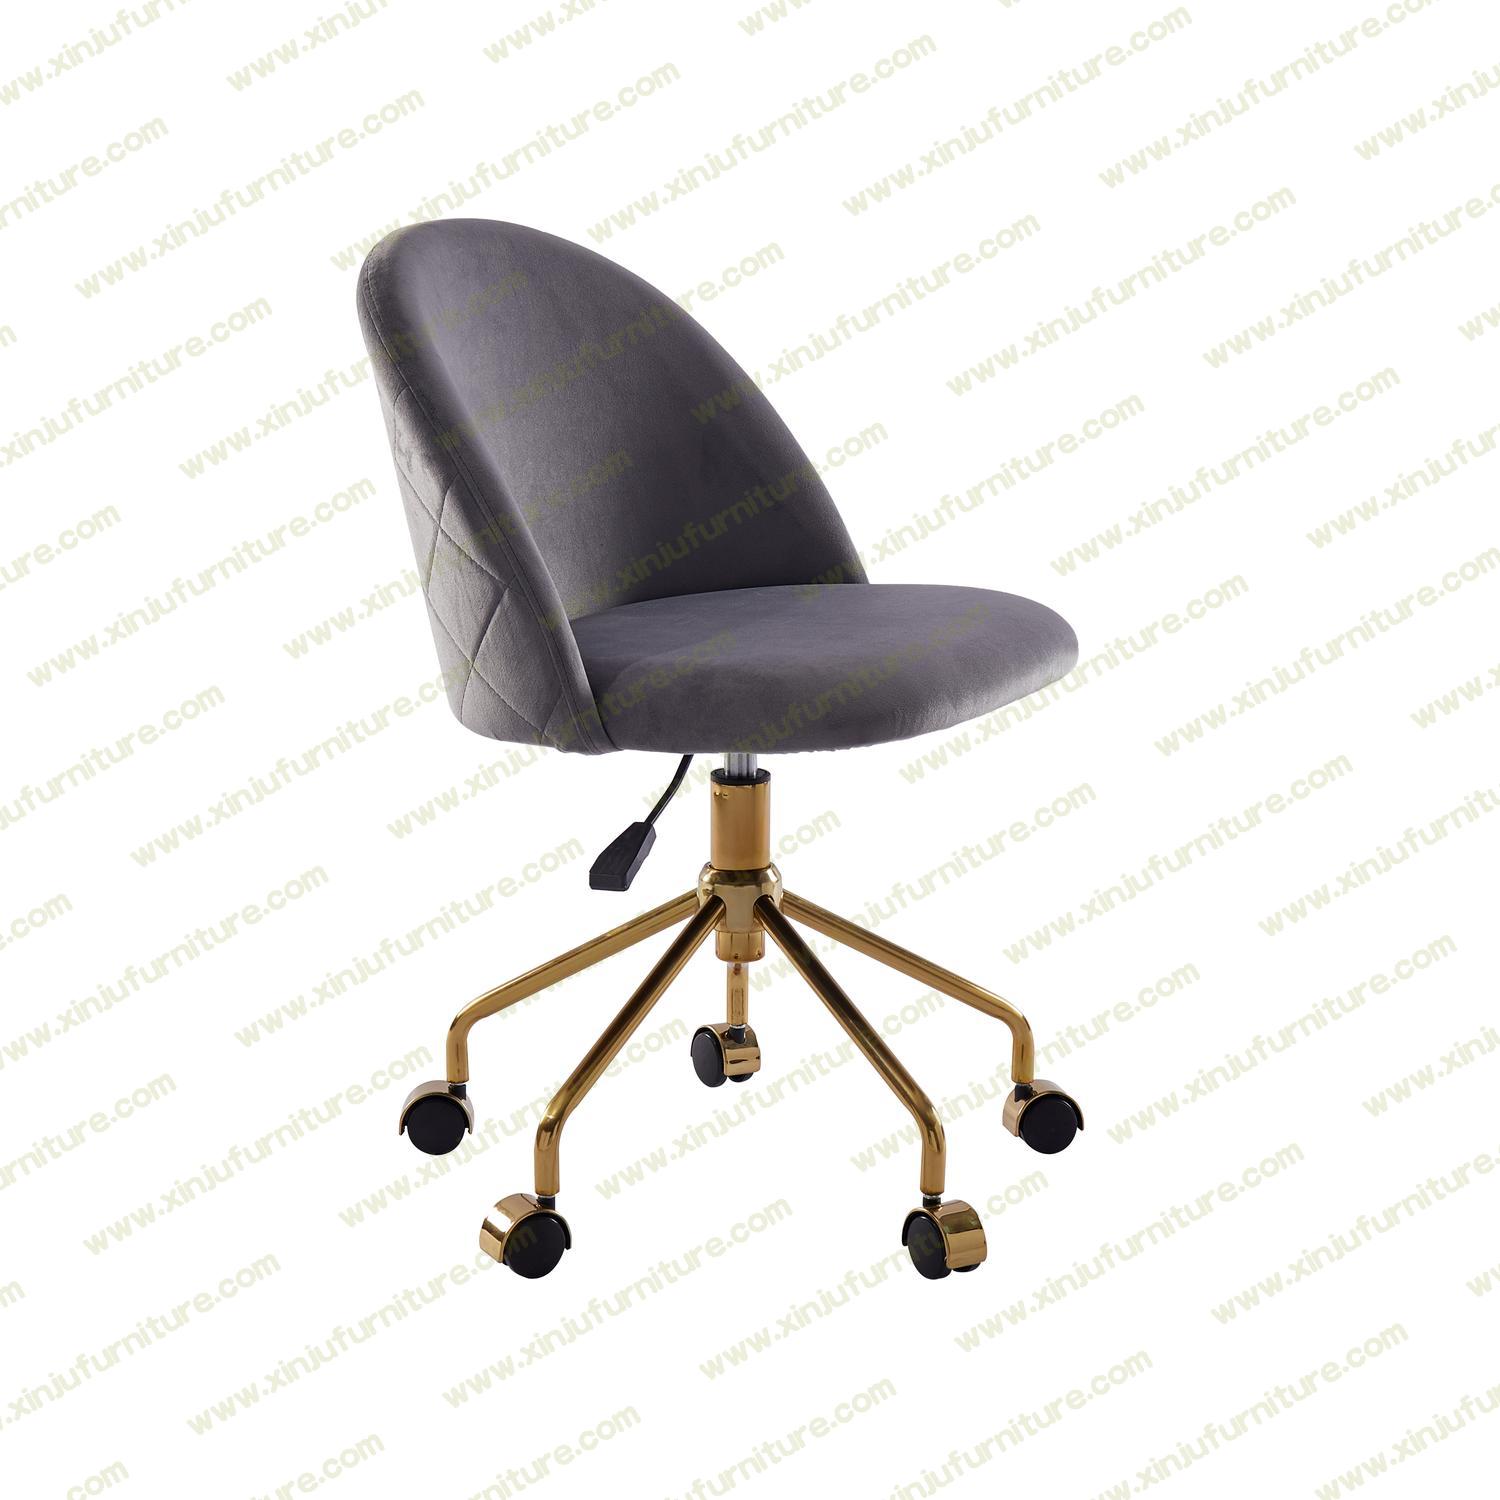 Simple movable tufted office chair